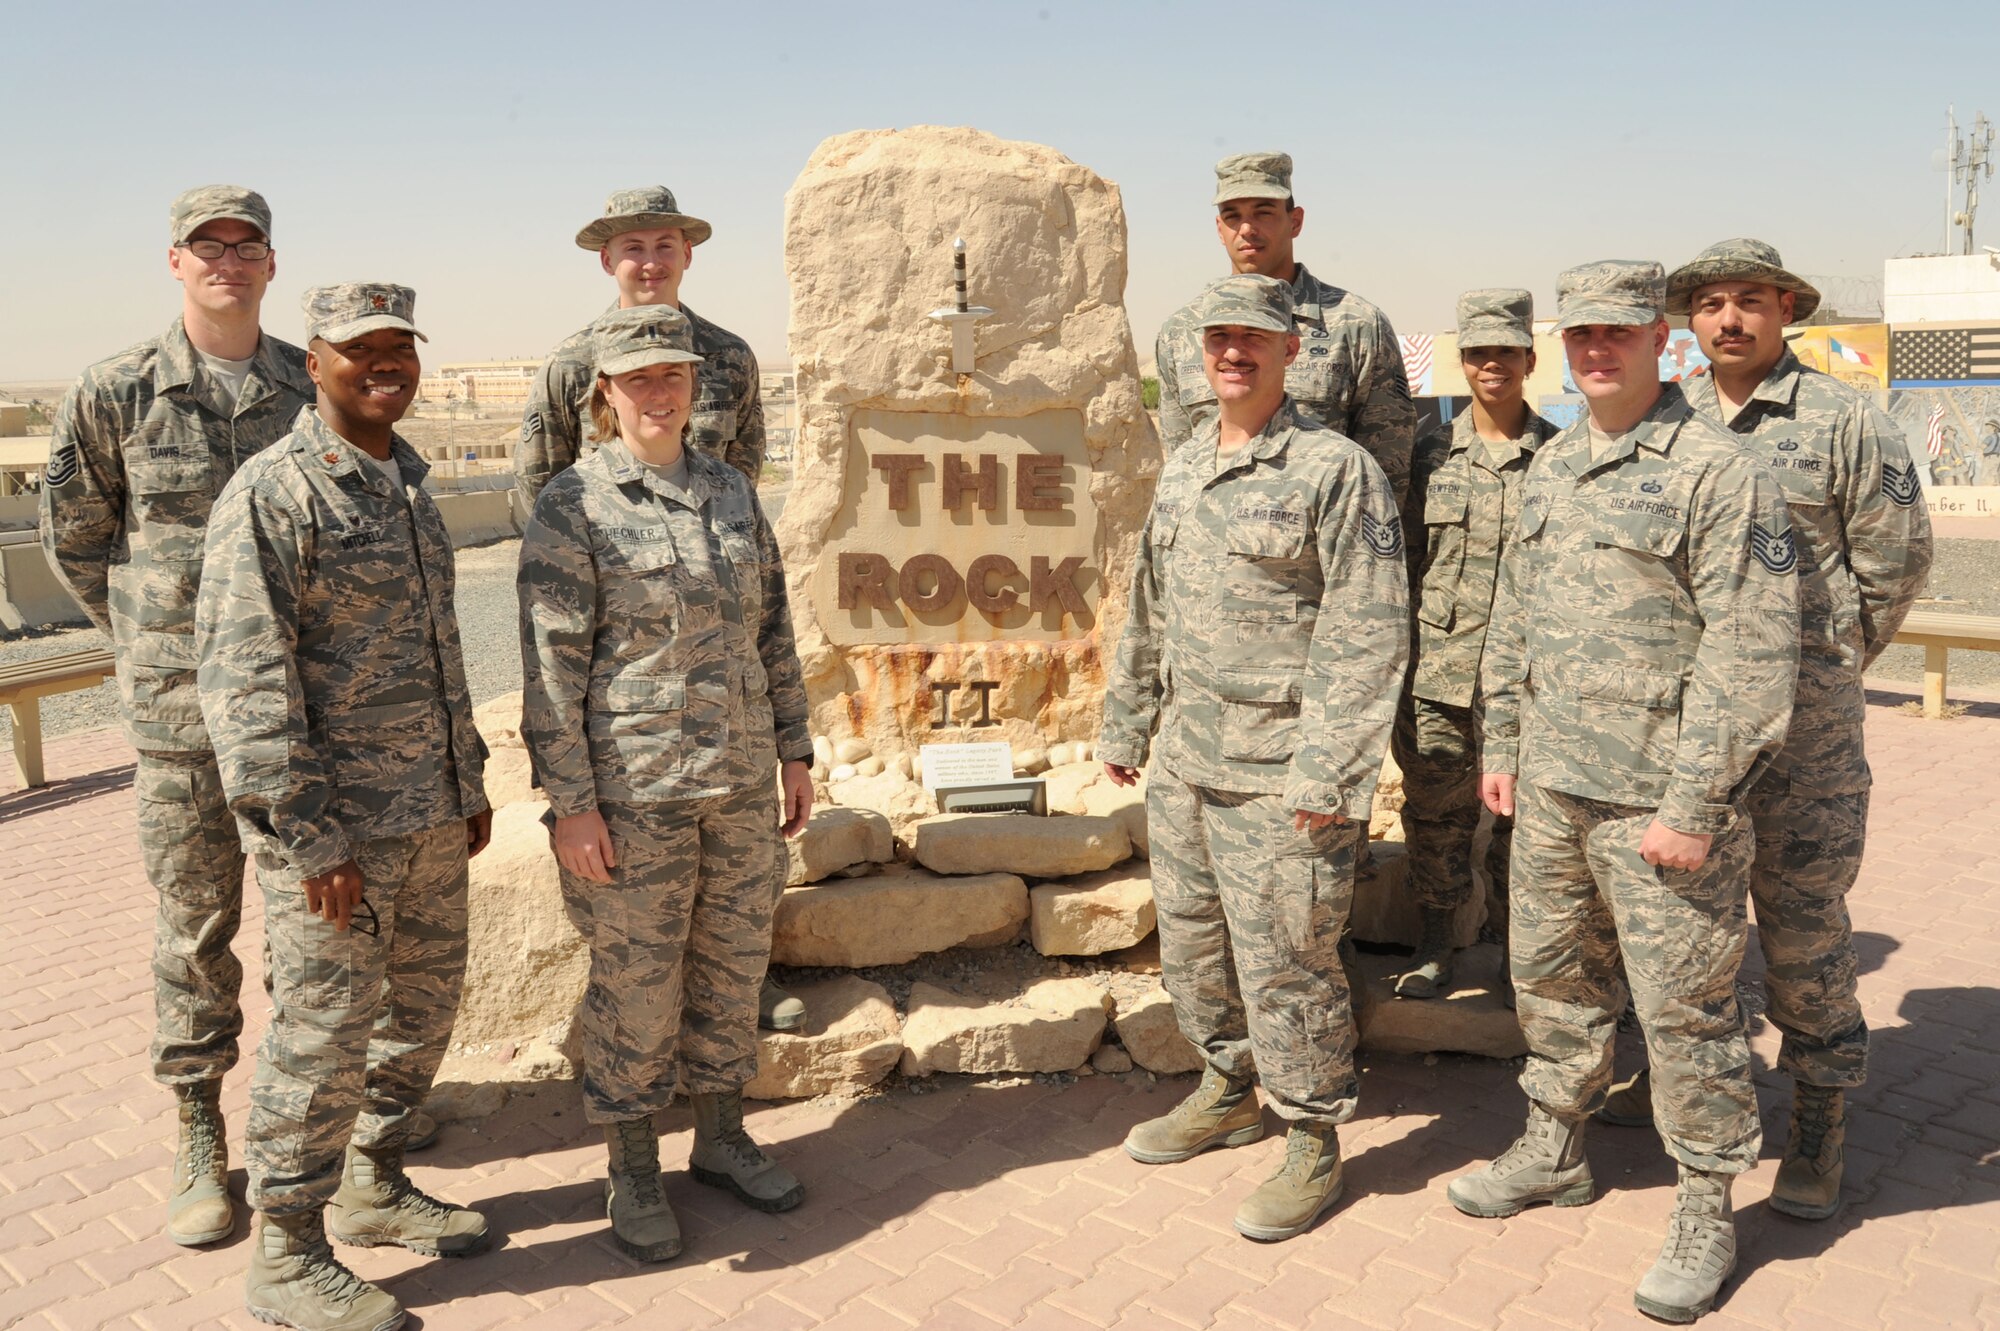 The 386th Expeditionary Contracting Squadron is made up of 11 contingency contracting officers, pictured here, who made it happen during the end of fiscal year 2016 at an undisclosed location in Southwest Asia. In the final month of FY16 alone, the 386 ECONS awarded an estimated $3.7 million and completed 93 contract actions that directly impacted Operation Inherent Resolve. (U.S. Air Force photo/Senior Airman Zachary Kee)